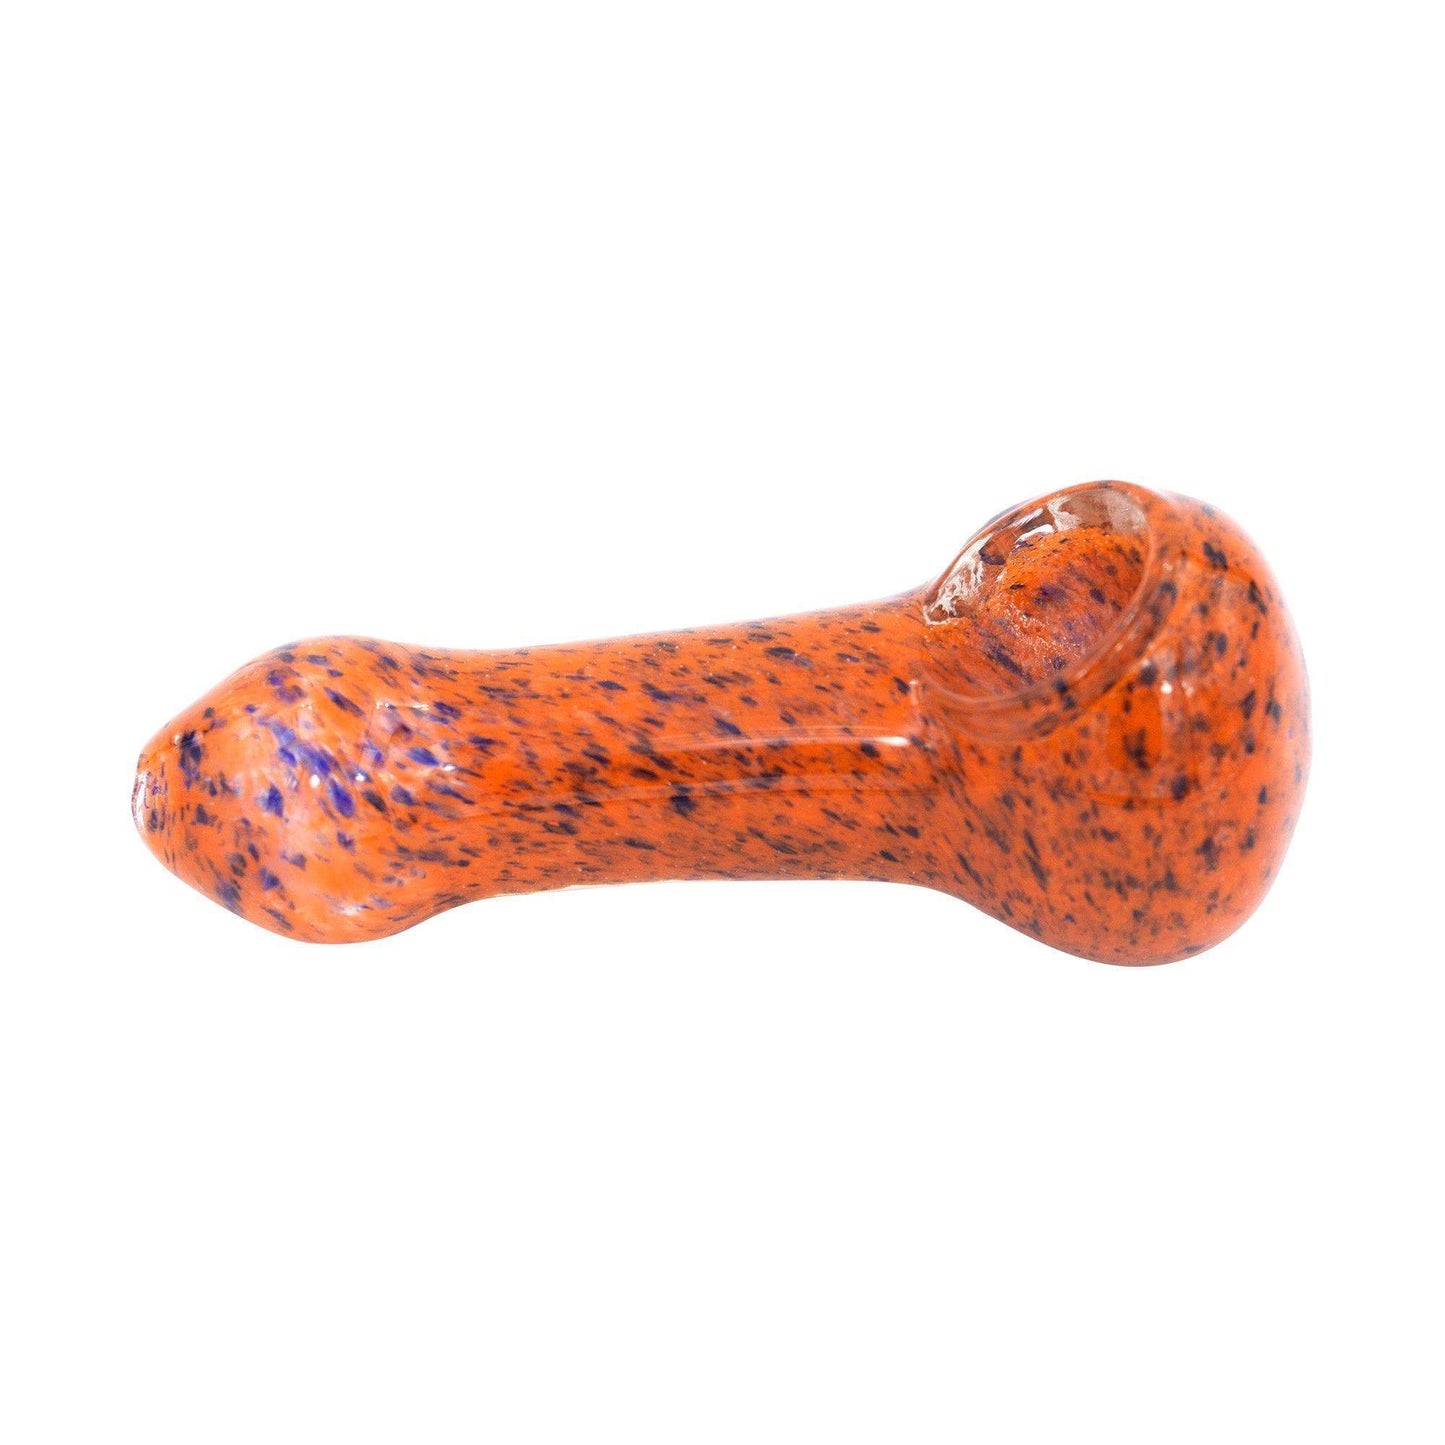 Orange Stylish 4-inch compact glass pipe smoking device with speckled marble-like design spoon shape